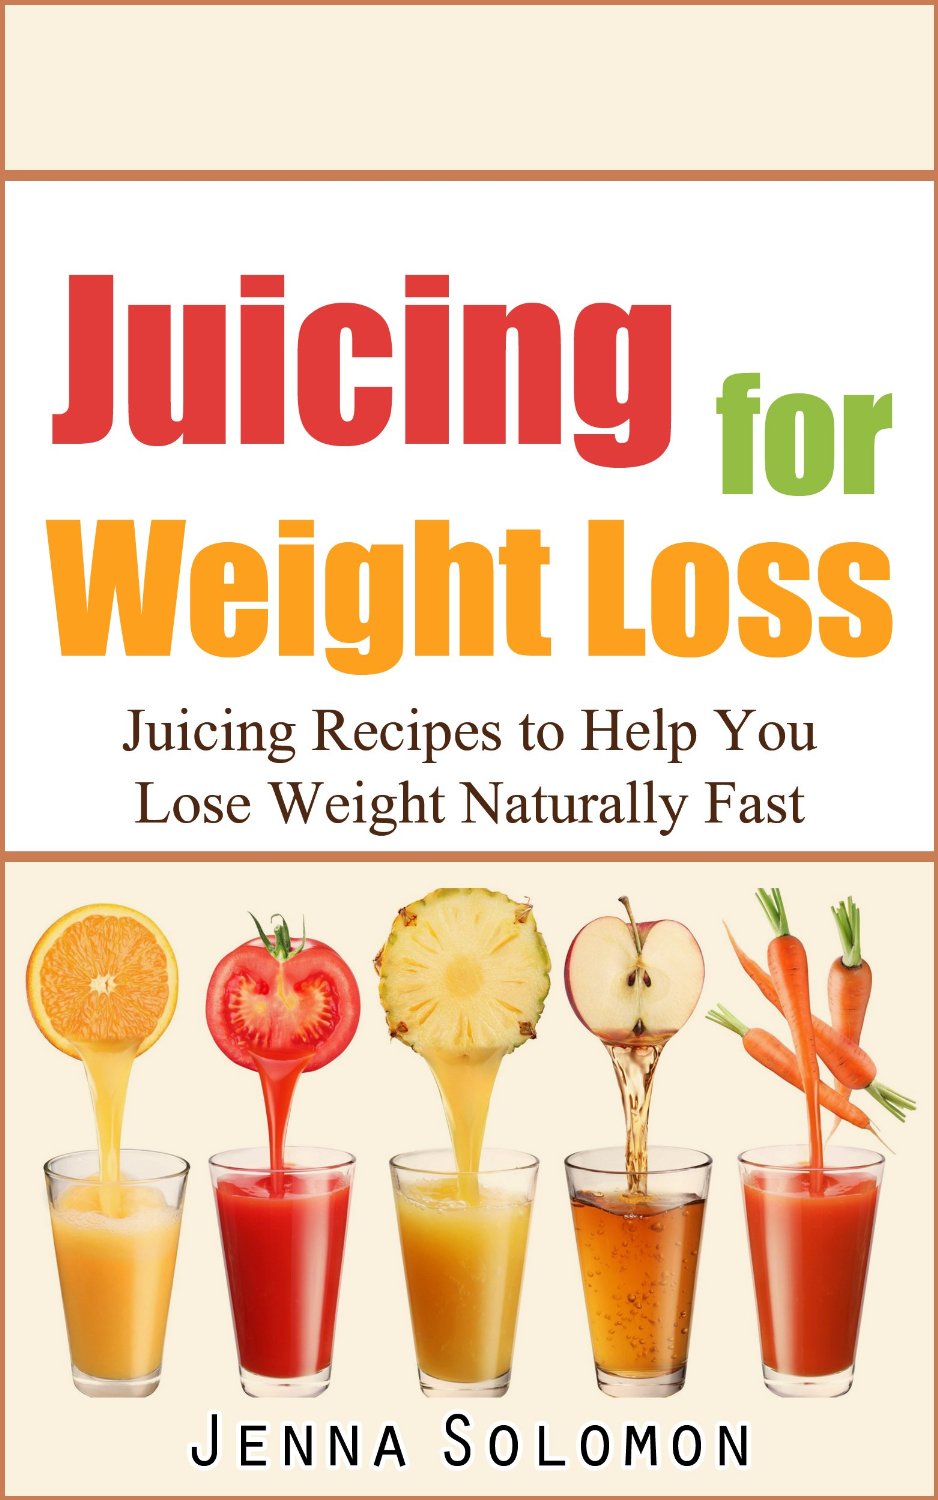 Juicing for Weight Loss: Juicing Recipes to Help You Lose Weight Naturally Fast by Jenna Solomon